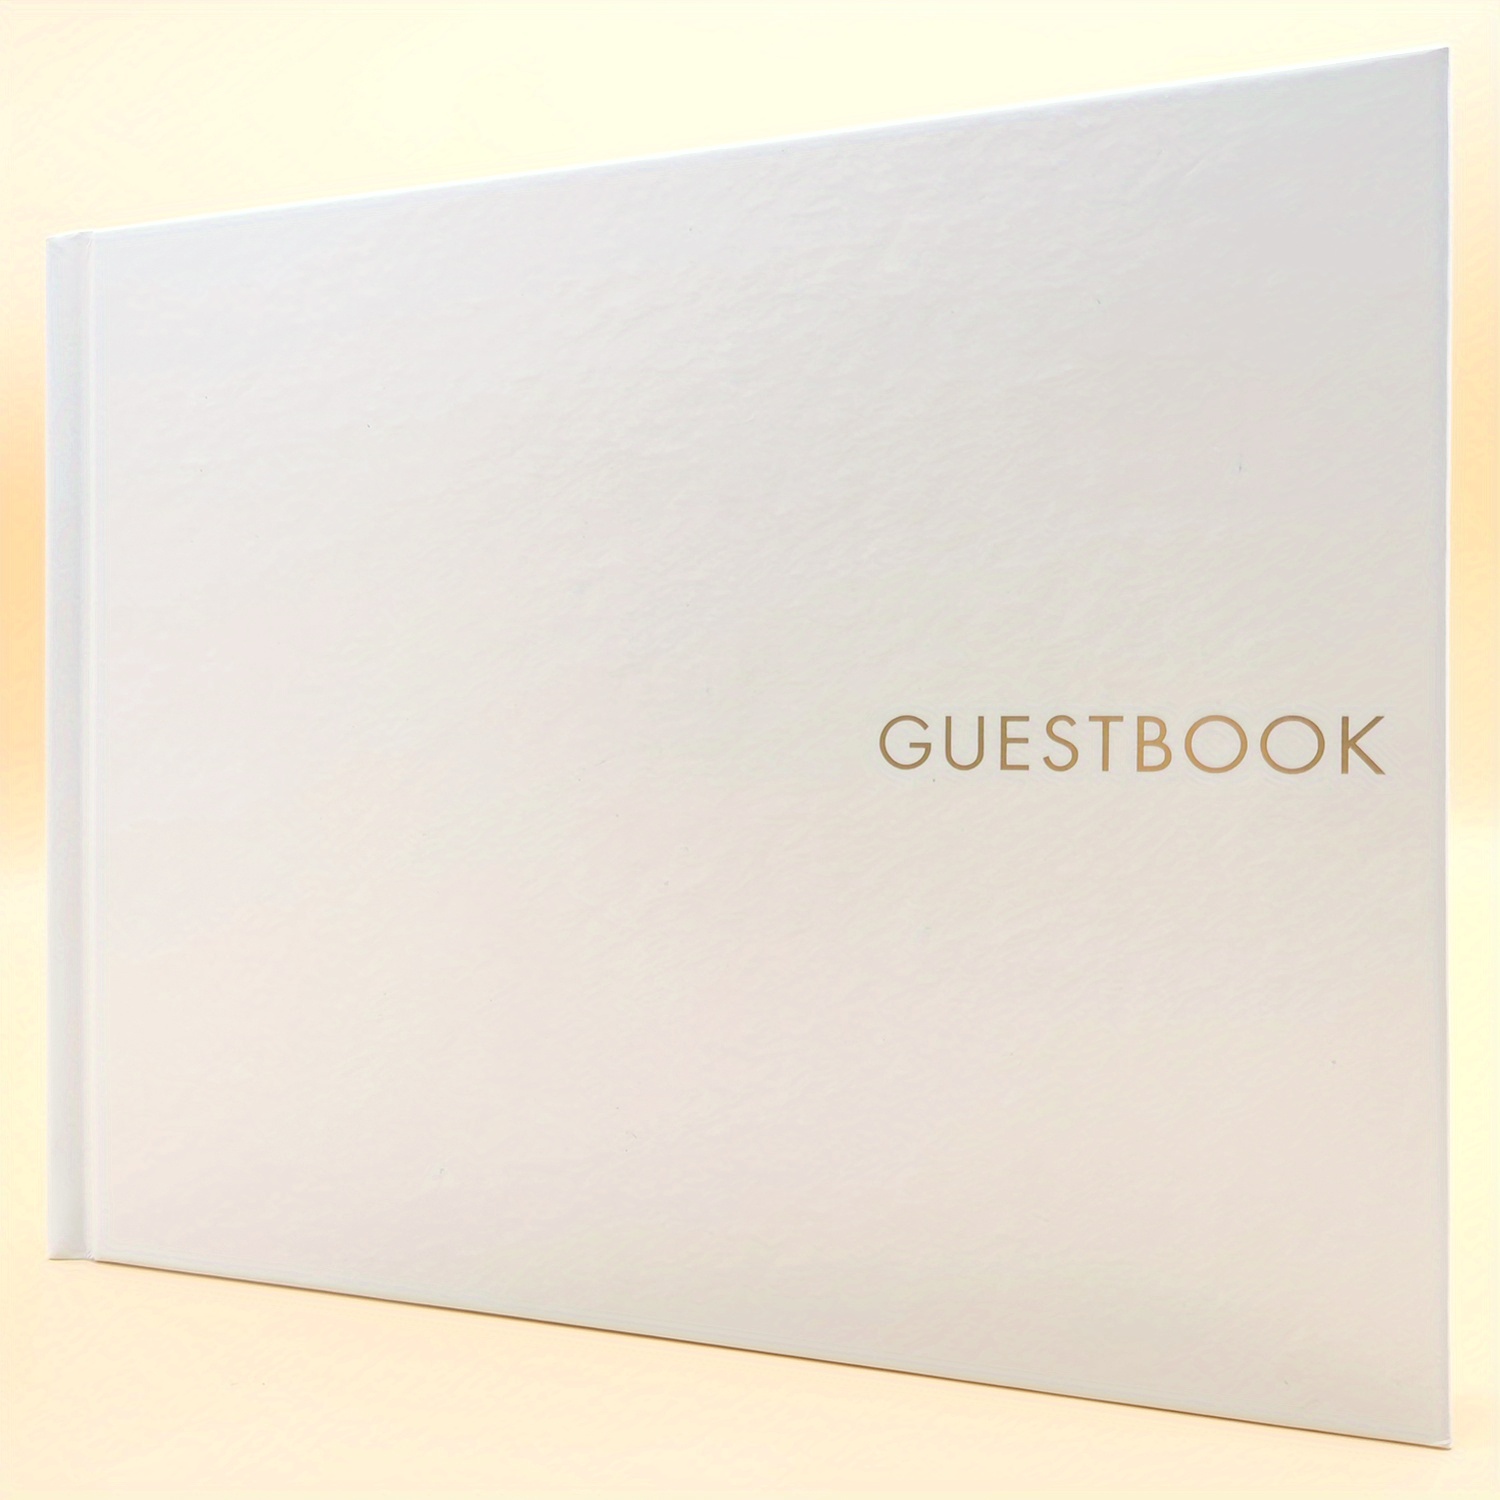 Wedding Guest Book - Premium & Elegant Guestbook for Wedding Reception,  Anniversary, Birthday, Baby Shower - Guest Sign in Book with 100 Signature